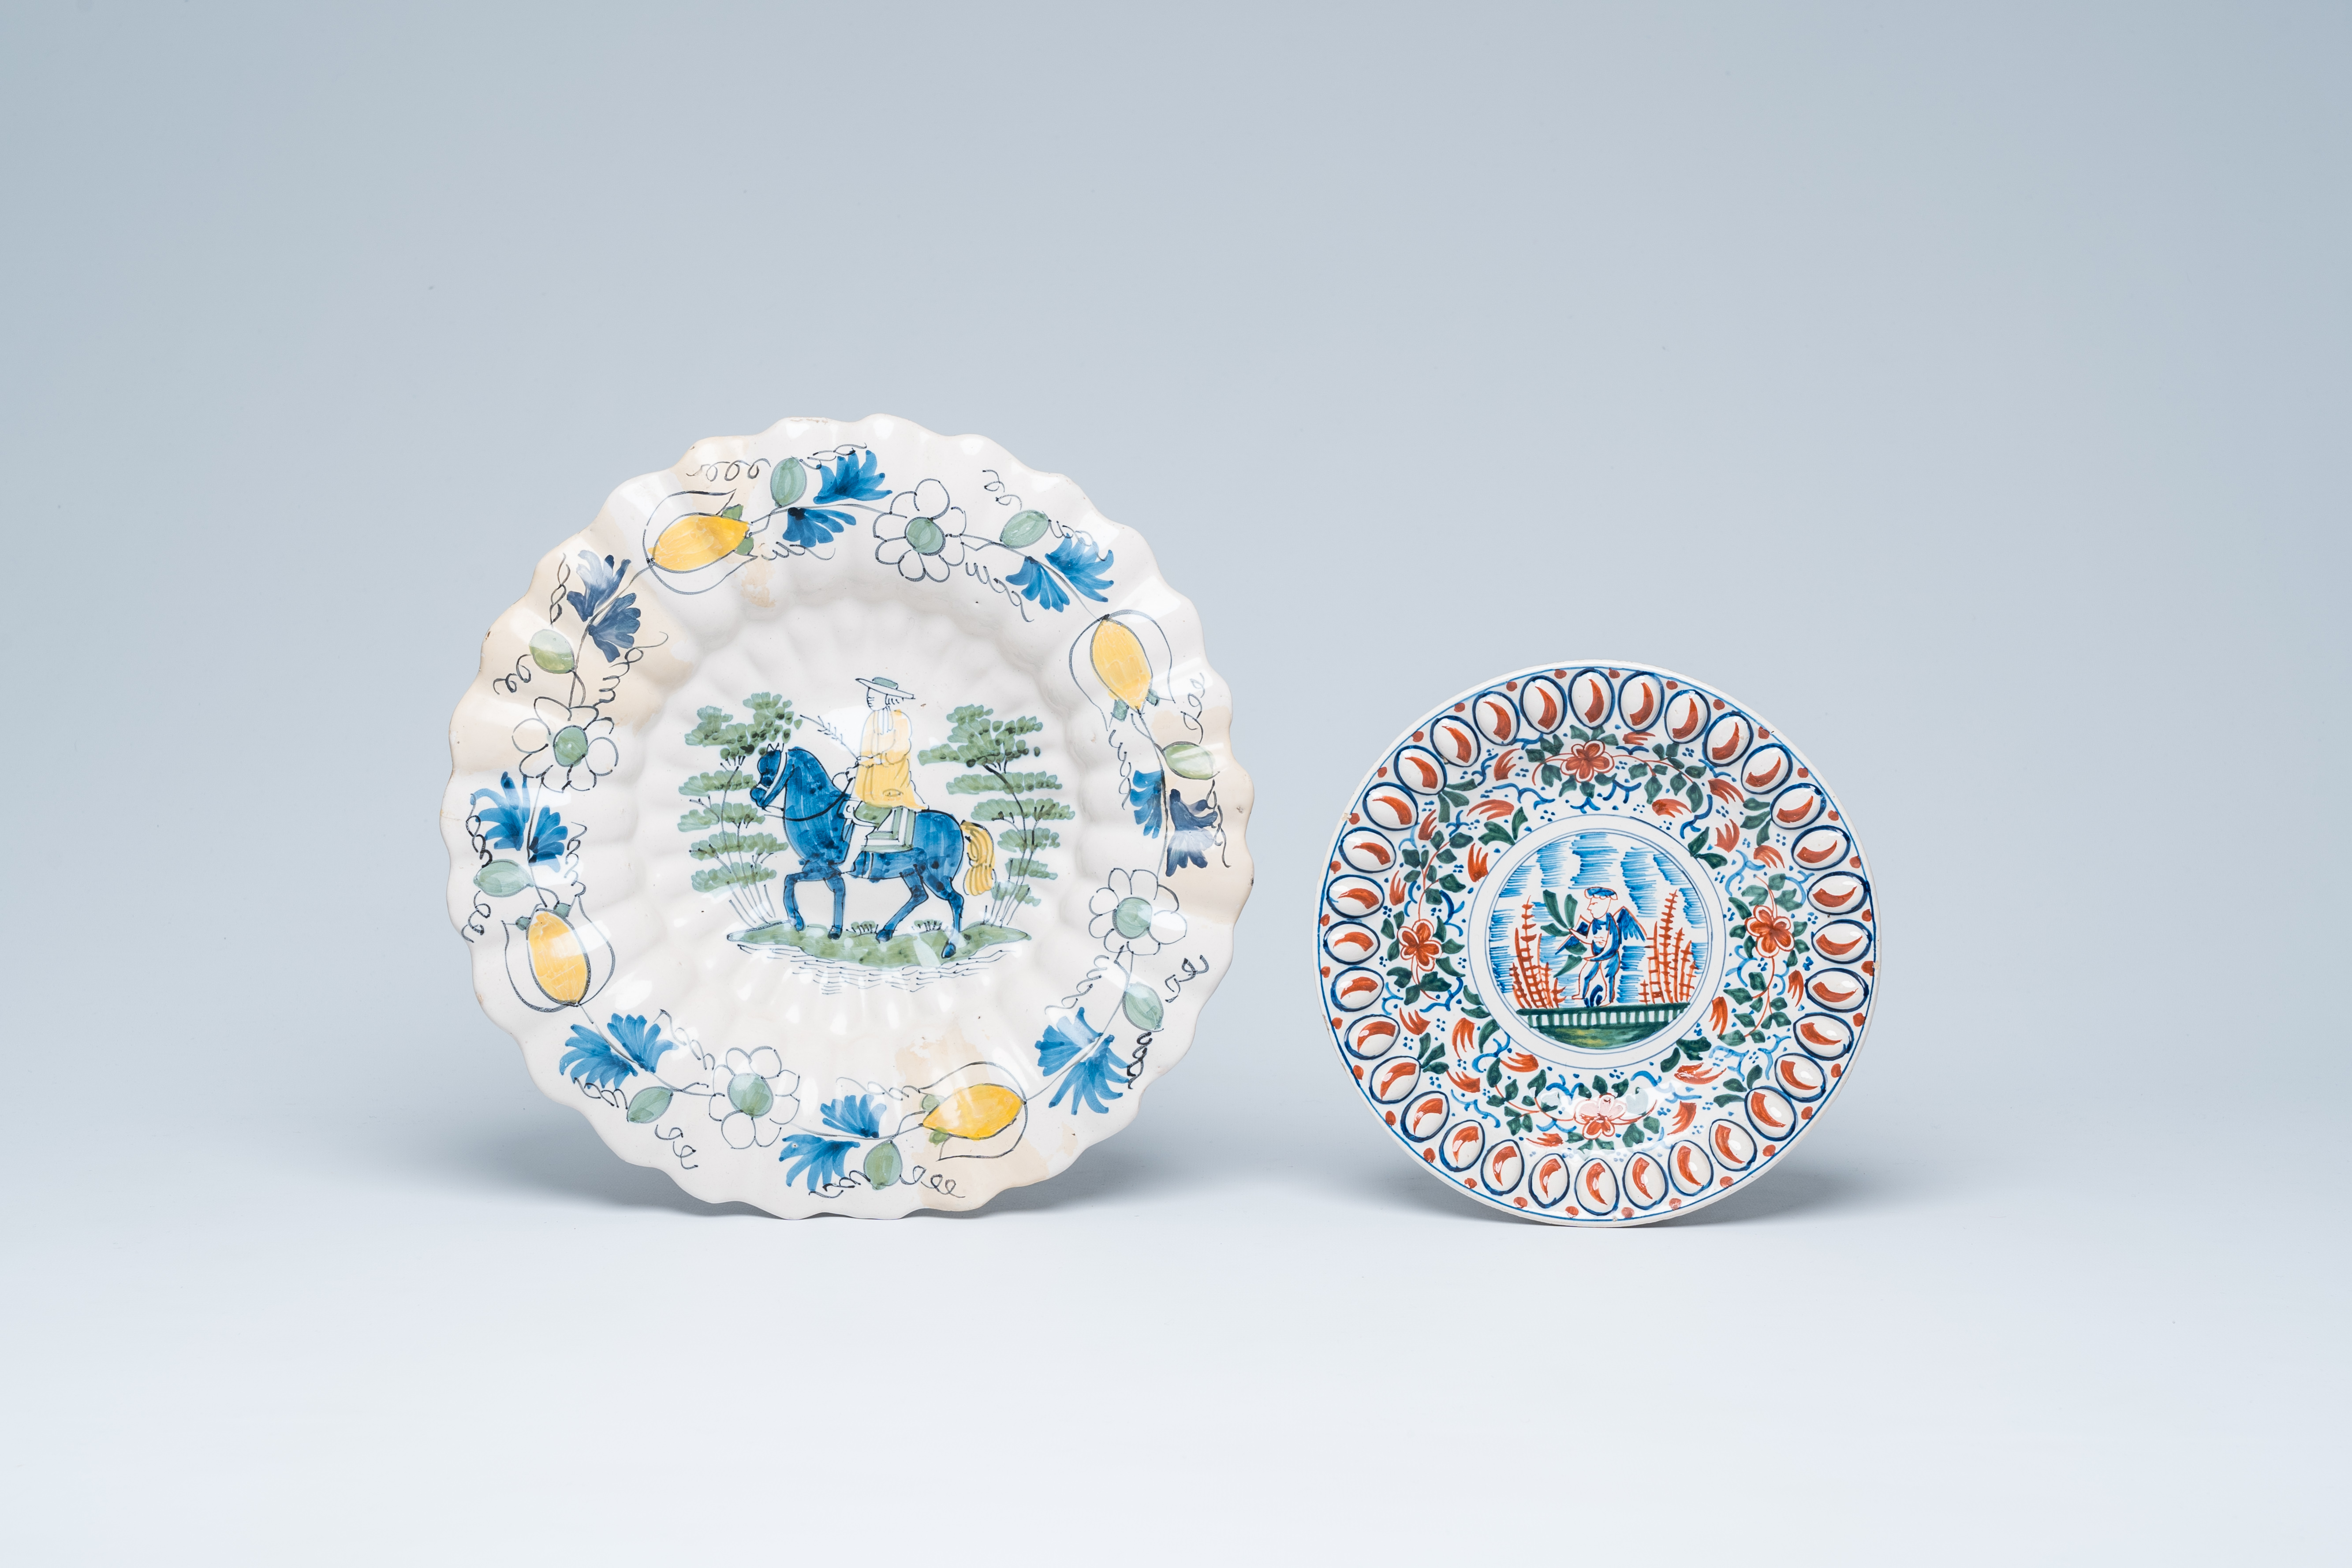 Five polychrome Delft dishes, England and The Netherlands, 18th C. - Image 4 of 5